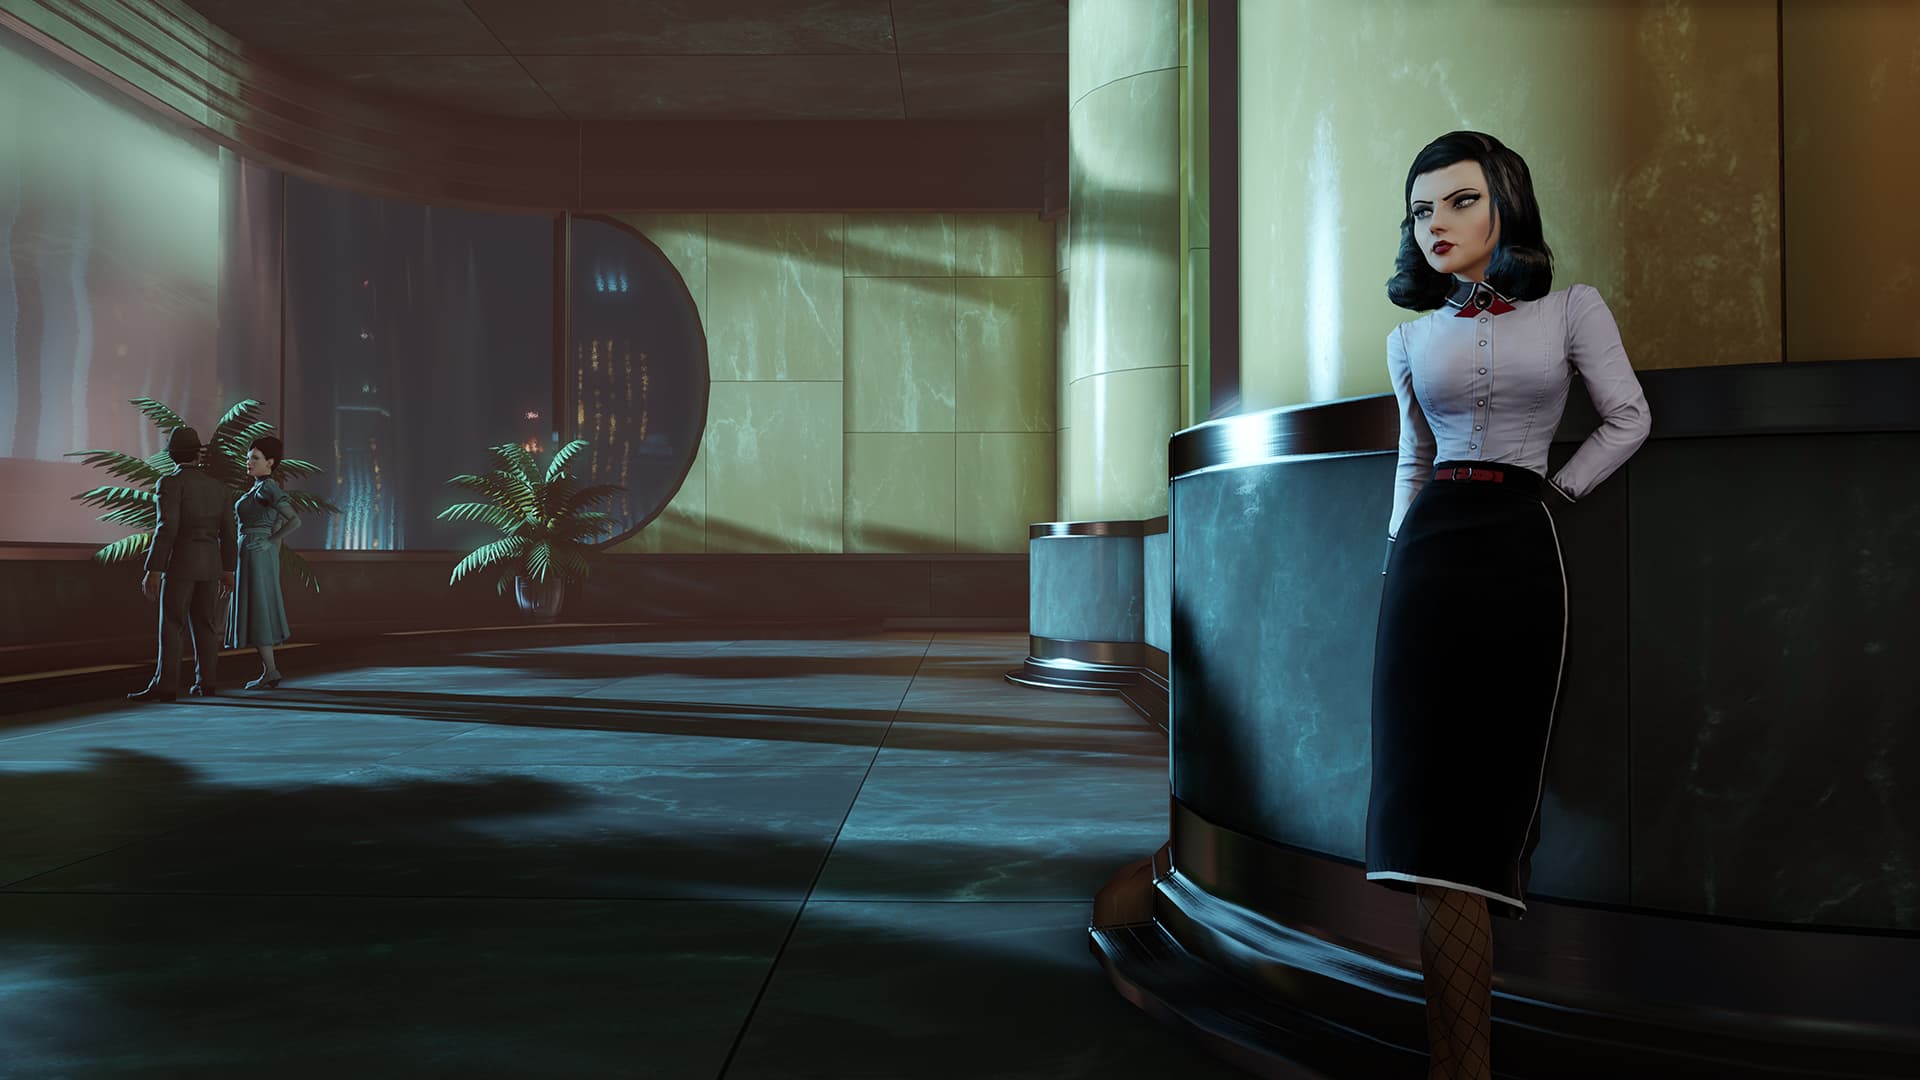 Buy BioShock Infinite: Burial at Sea - Episode One from the Humble Store